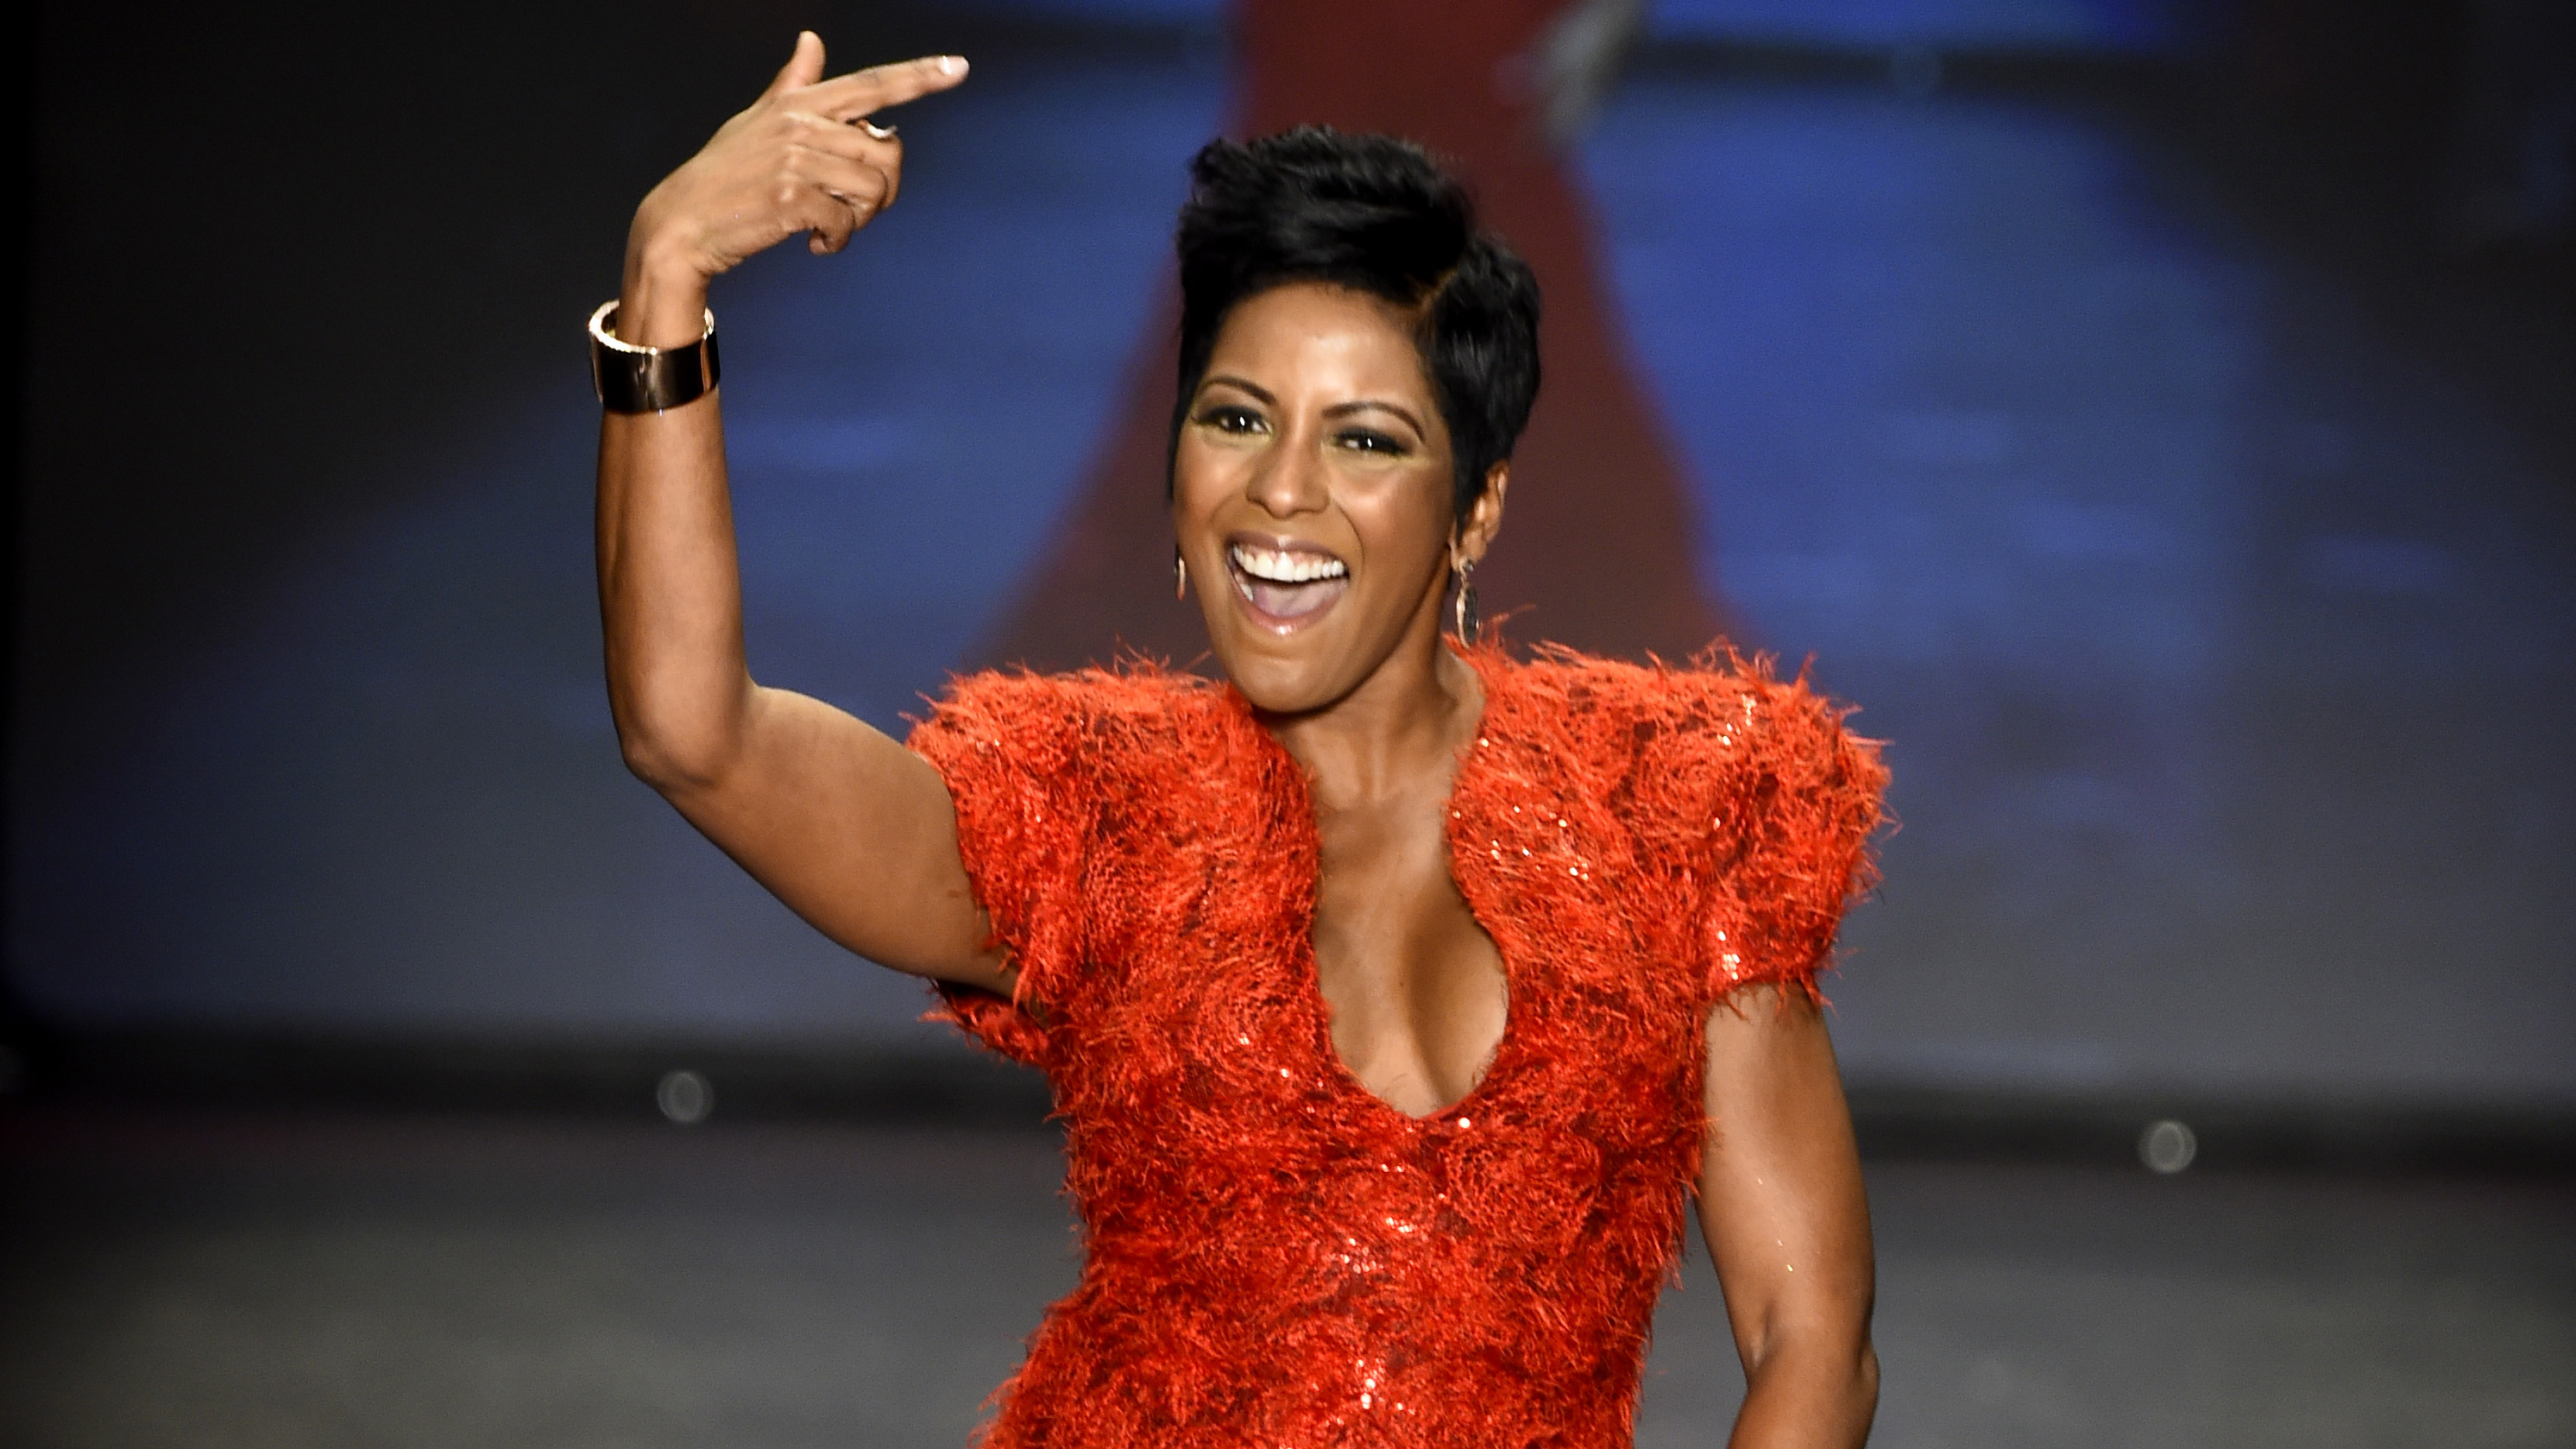 What Is Tamron Hall Doing Now? Get the Exciting Details on Her New Job!